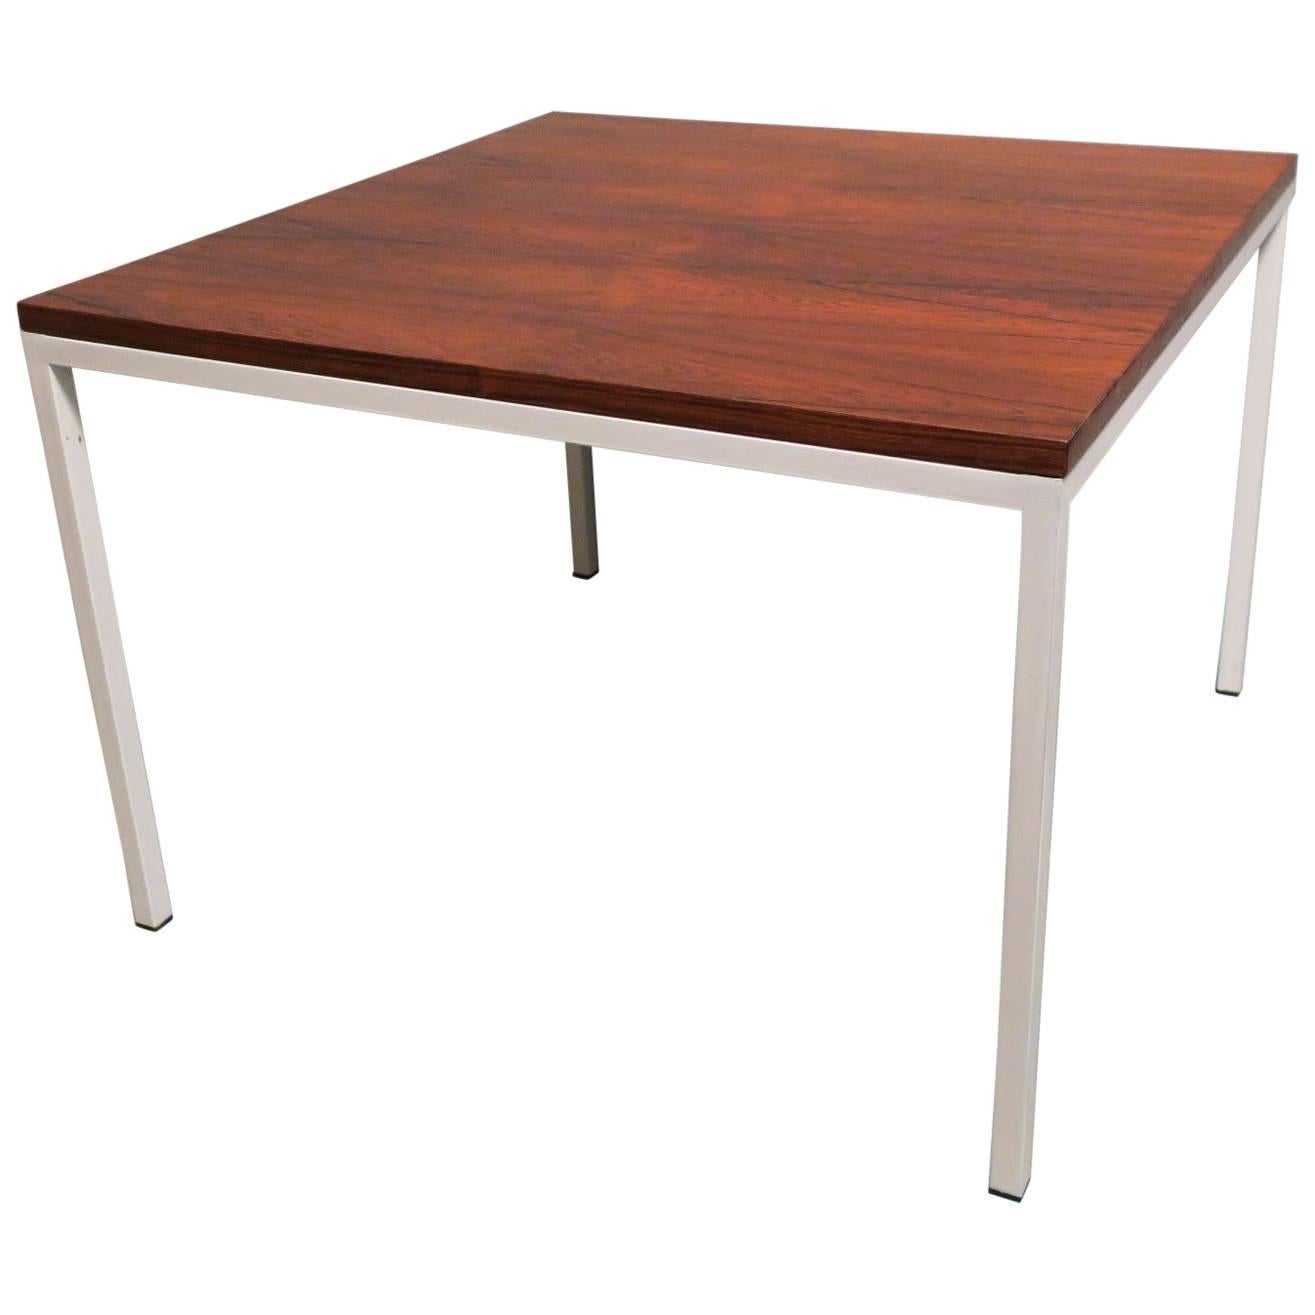 Modernist Rosewood Square Coffee Table with Metal Legs 1970 For Sale